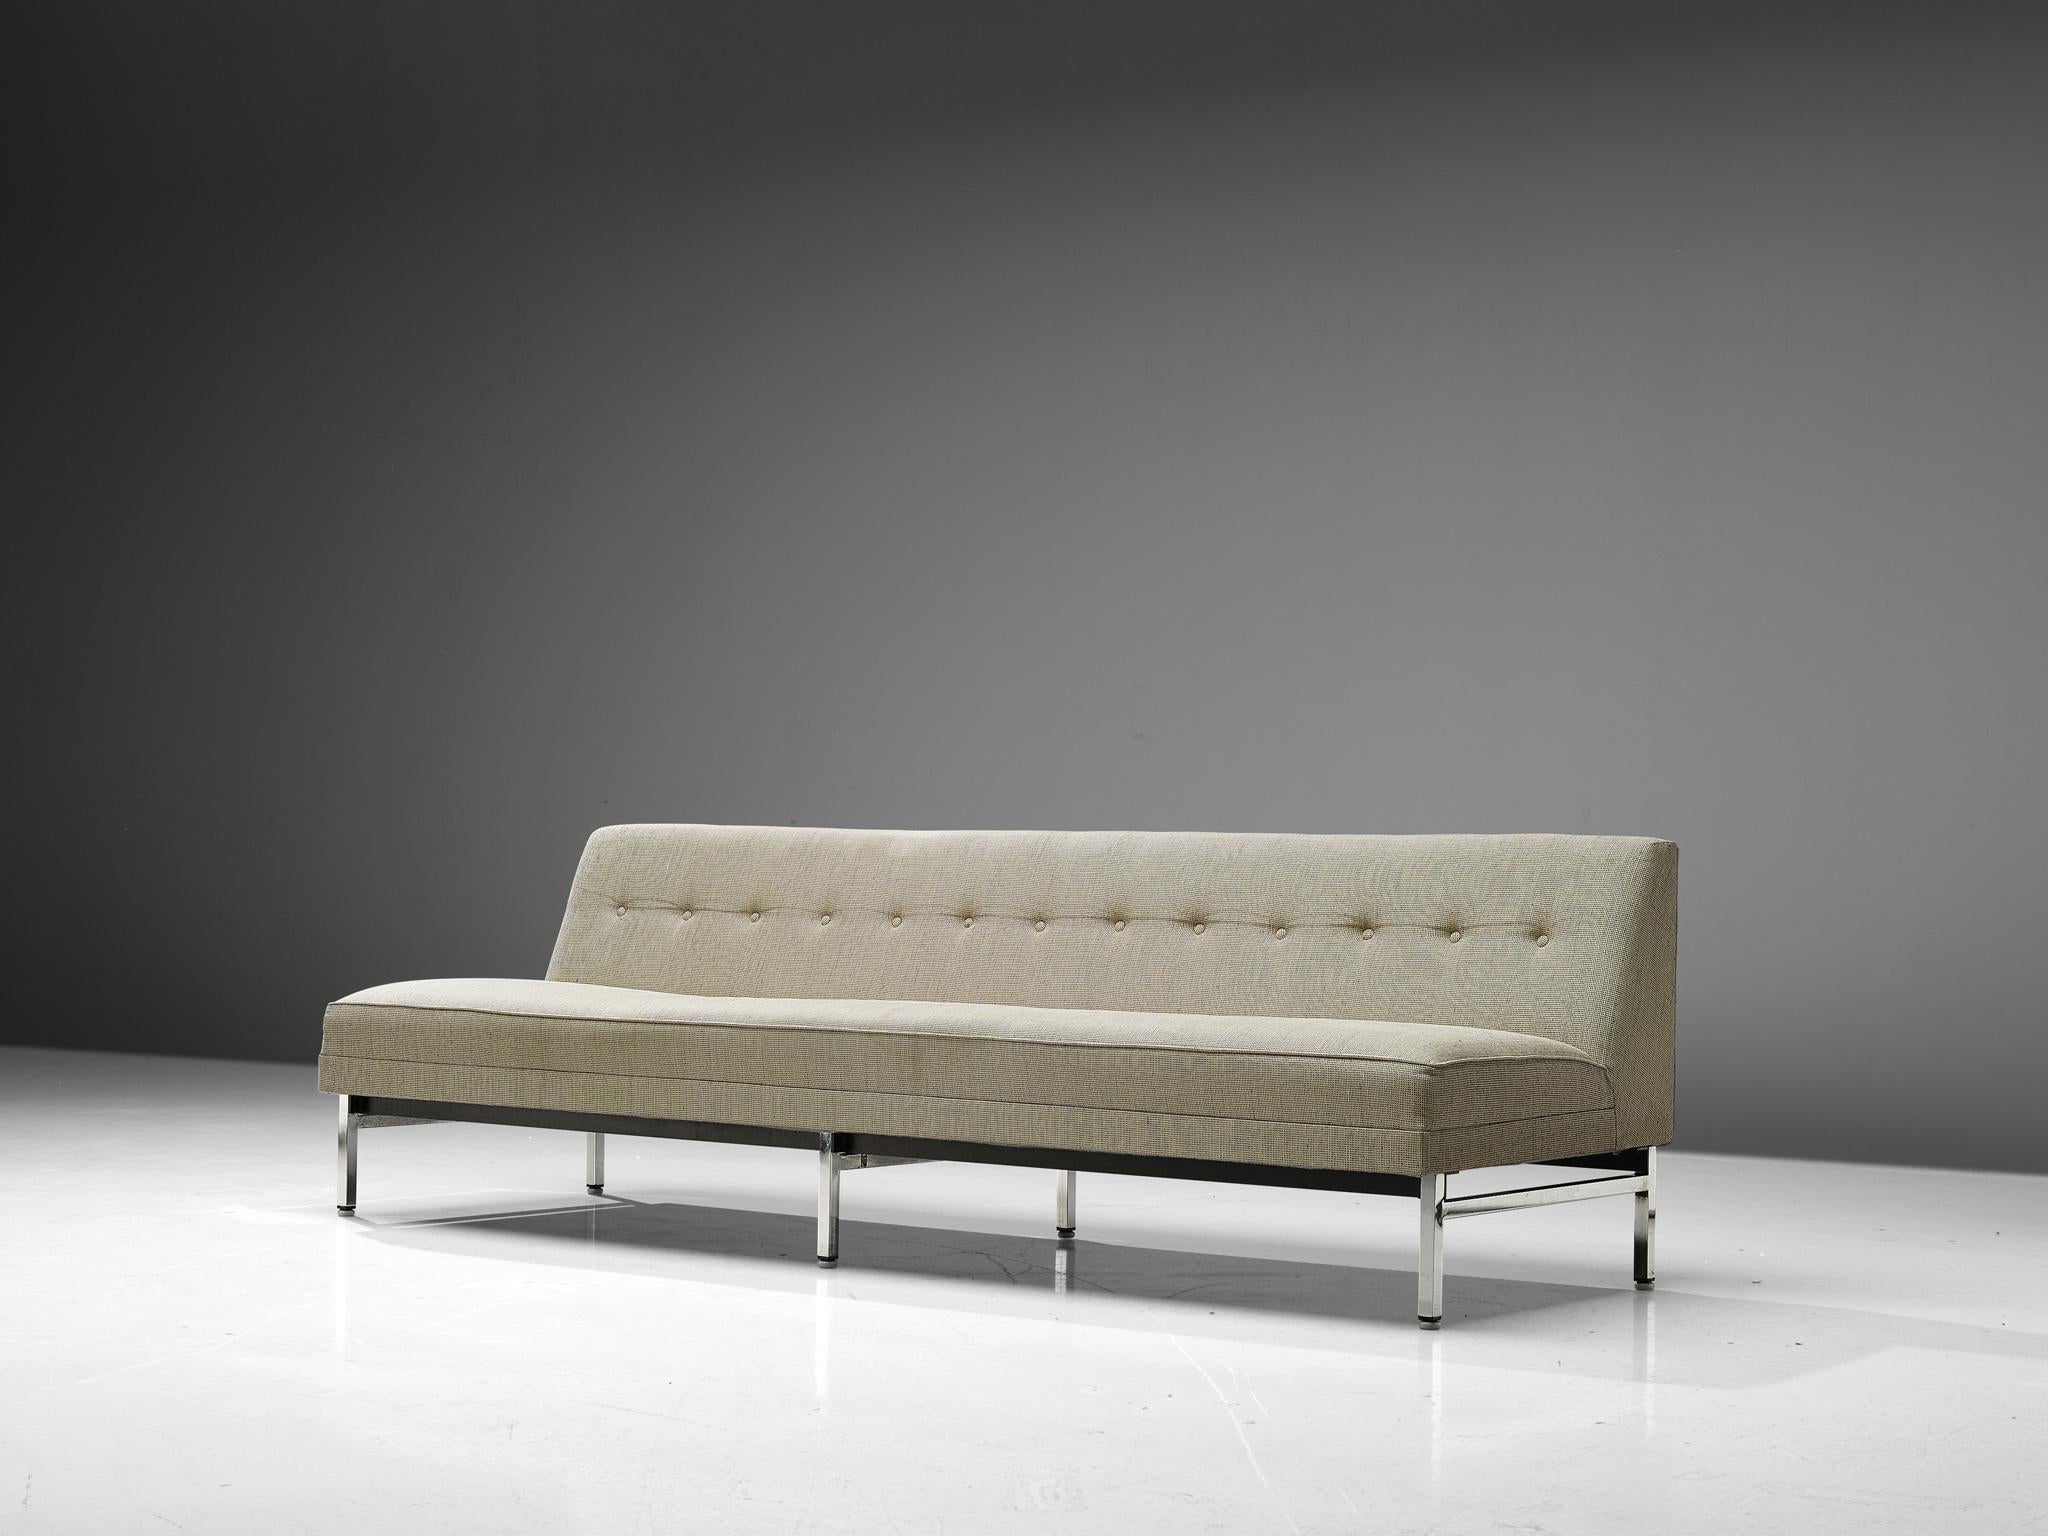 George Nelson for Herman Miller, sofa, chrome-plated metal, fabric, United States, 1960s

This fine sofa is designed by the renowned American furniture designer George Nelson. This sleek design is characterized by a solid construction based on sharp